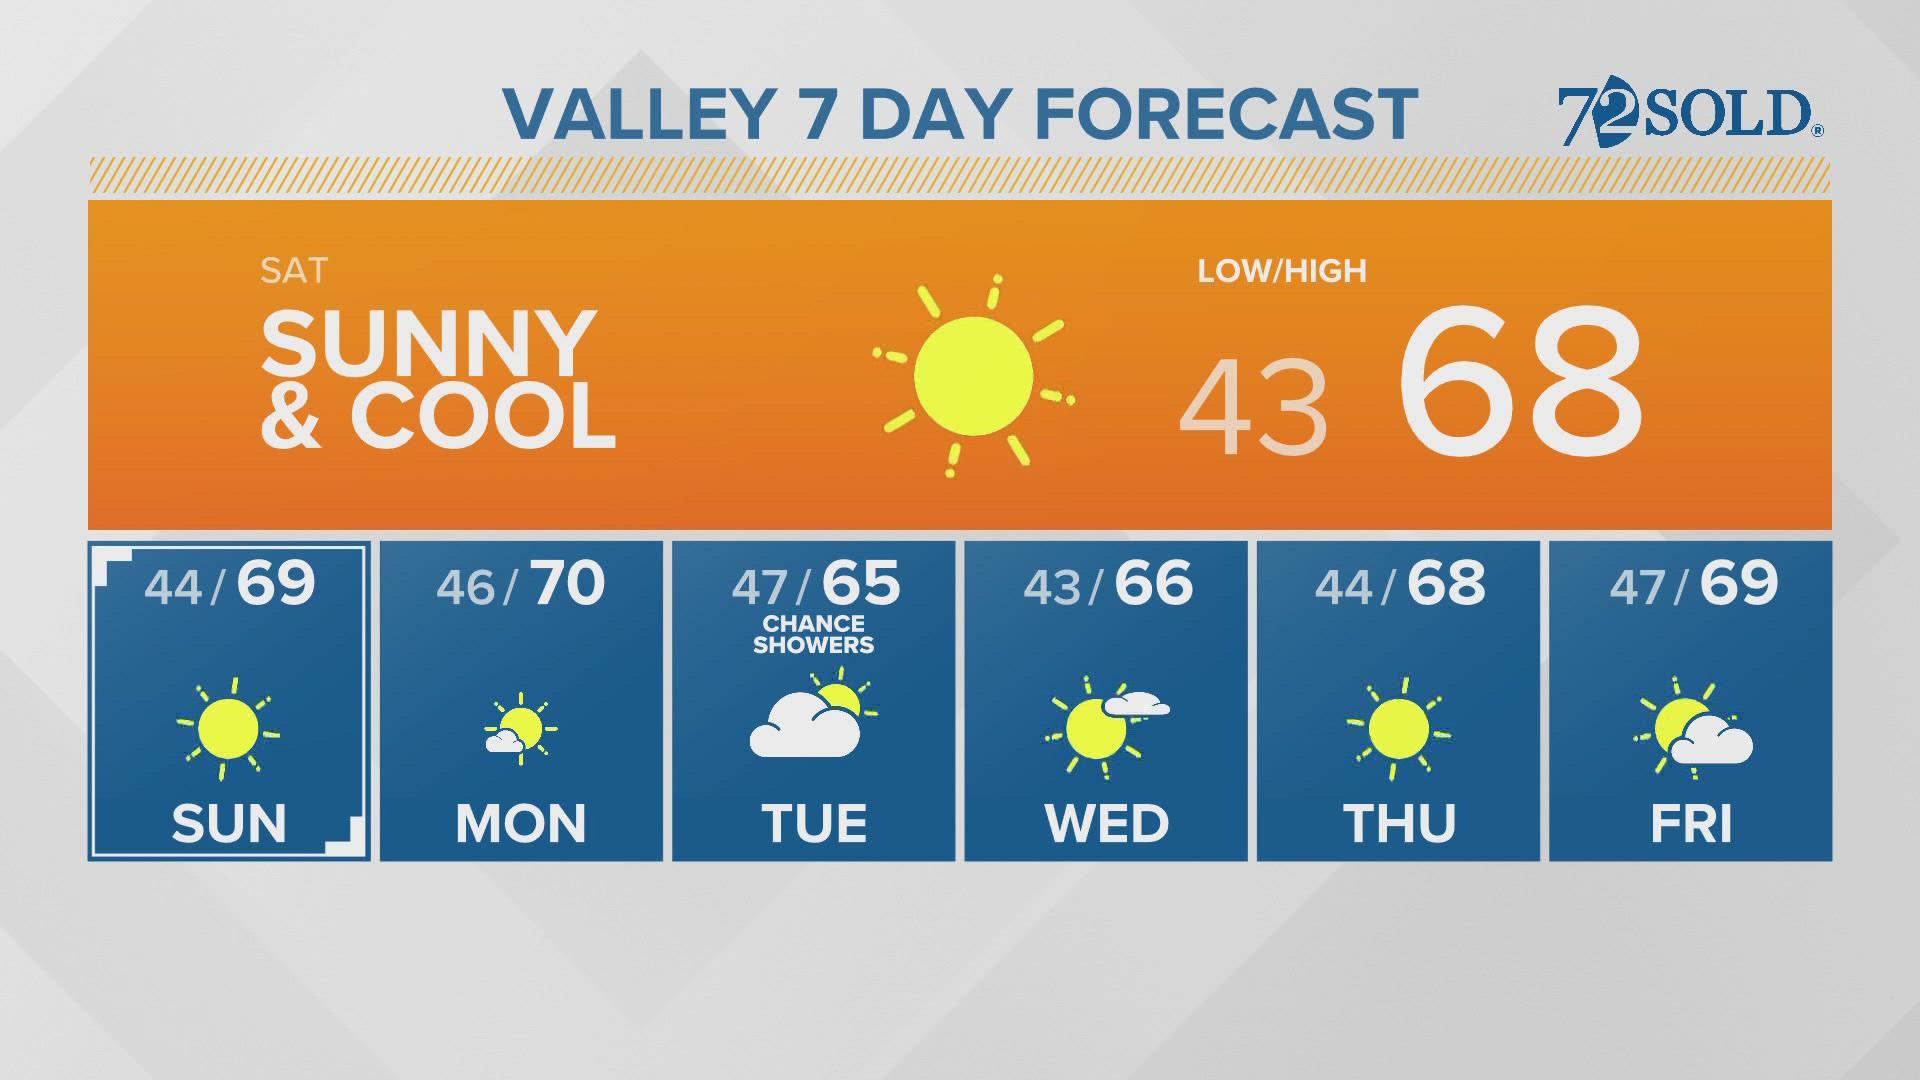 We've got a calm and clear weekend ahead with temperatures slightly below average for the year.